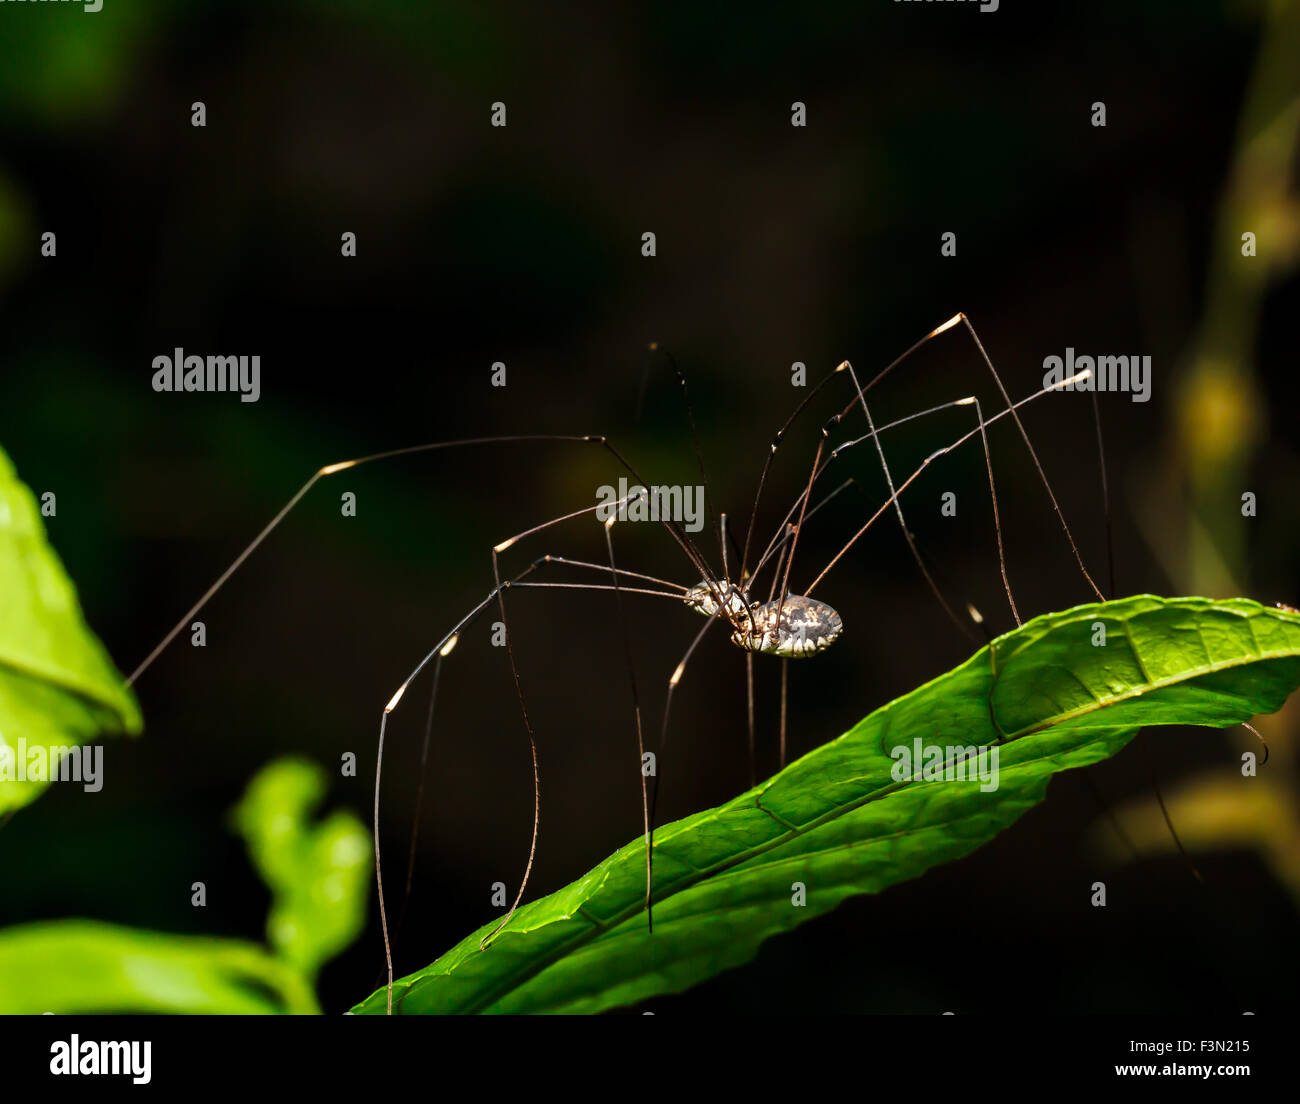 Gambe lunghe spider Foto Stock